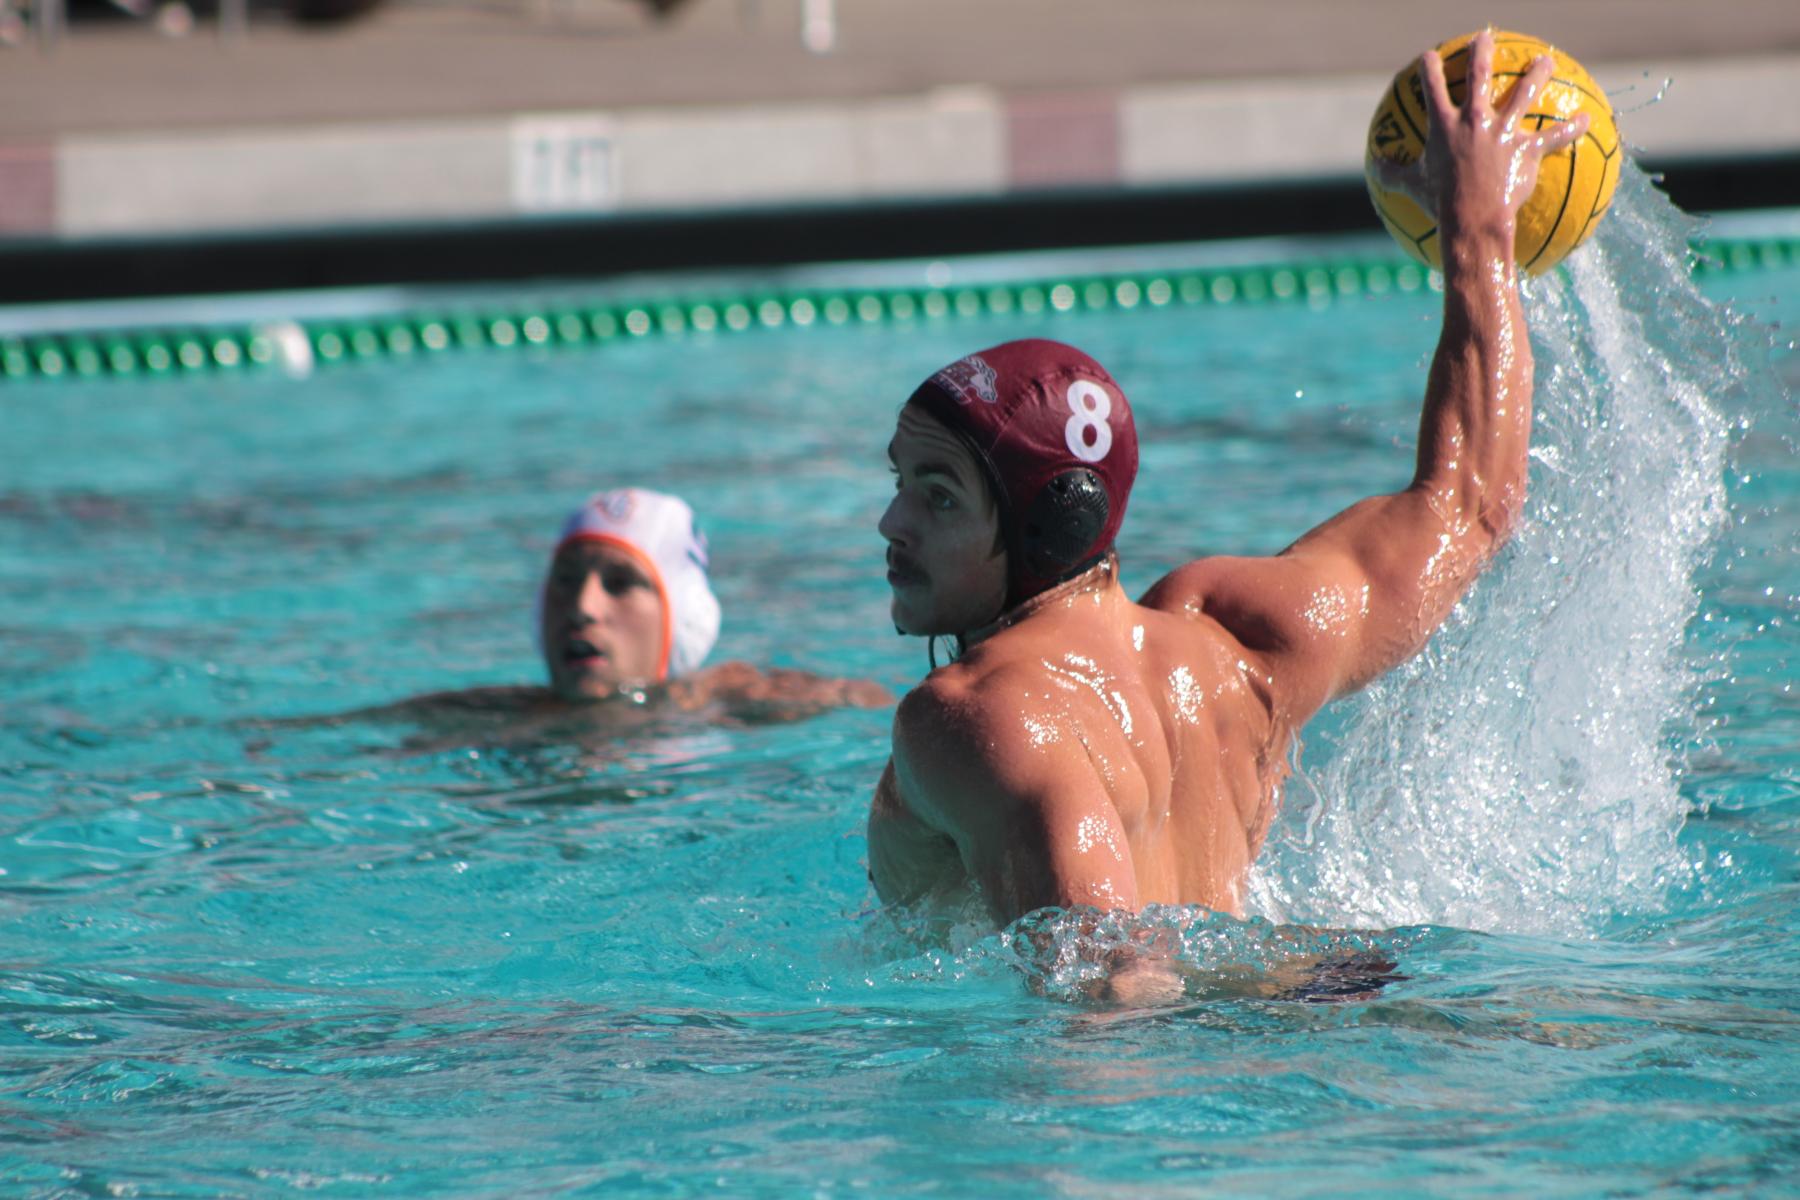 Broncos Knock Off LMU Sunday, Finish Fifth in WWPA Championships